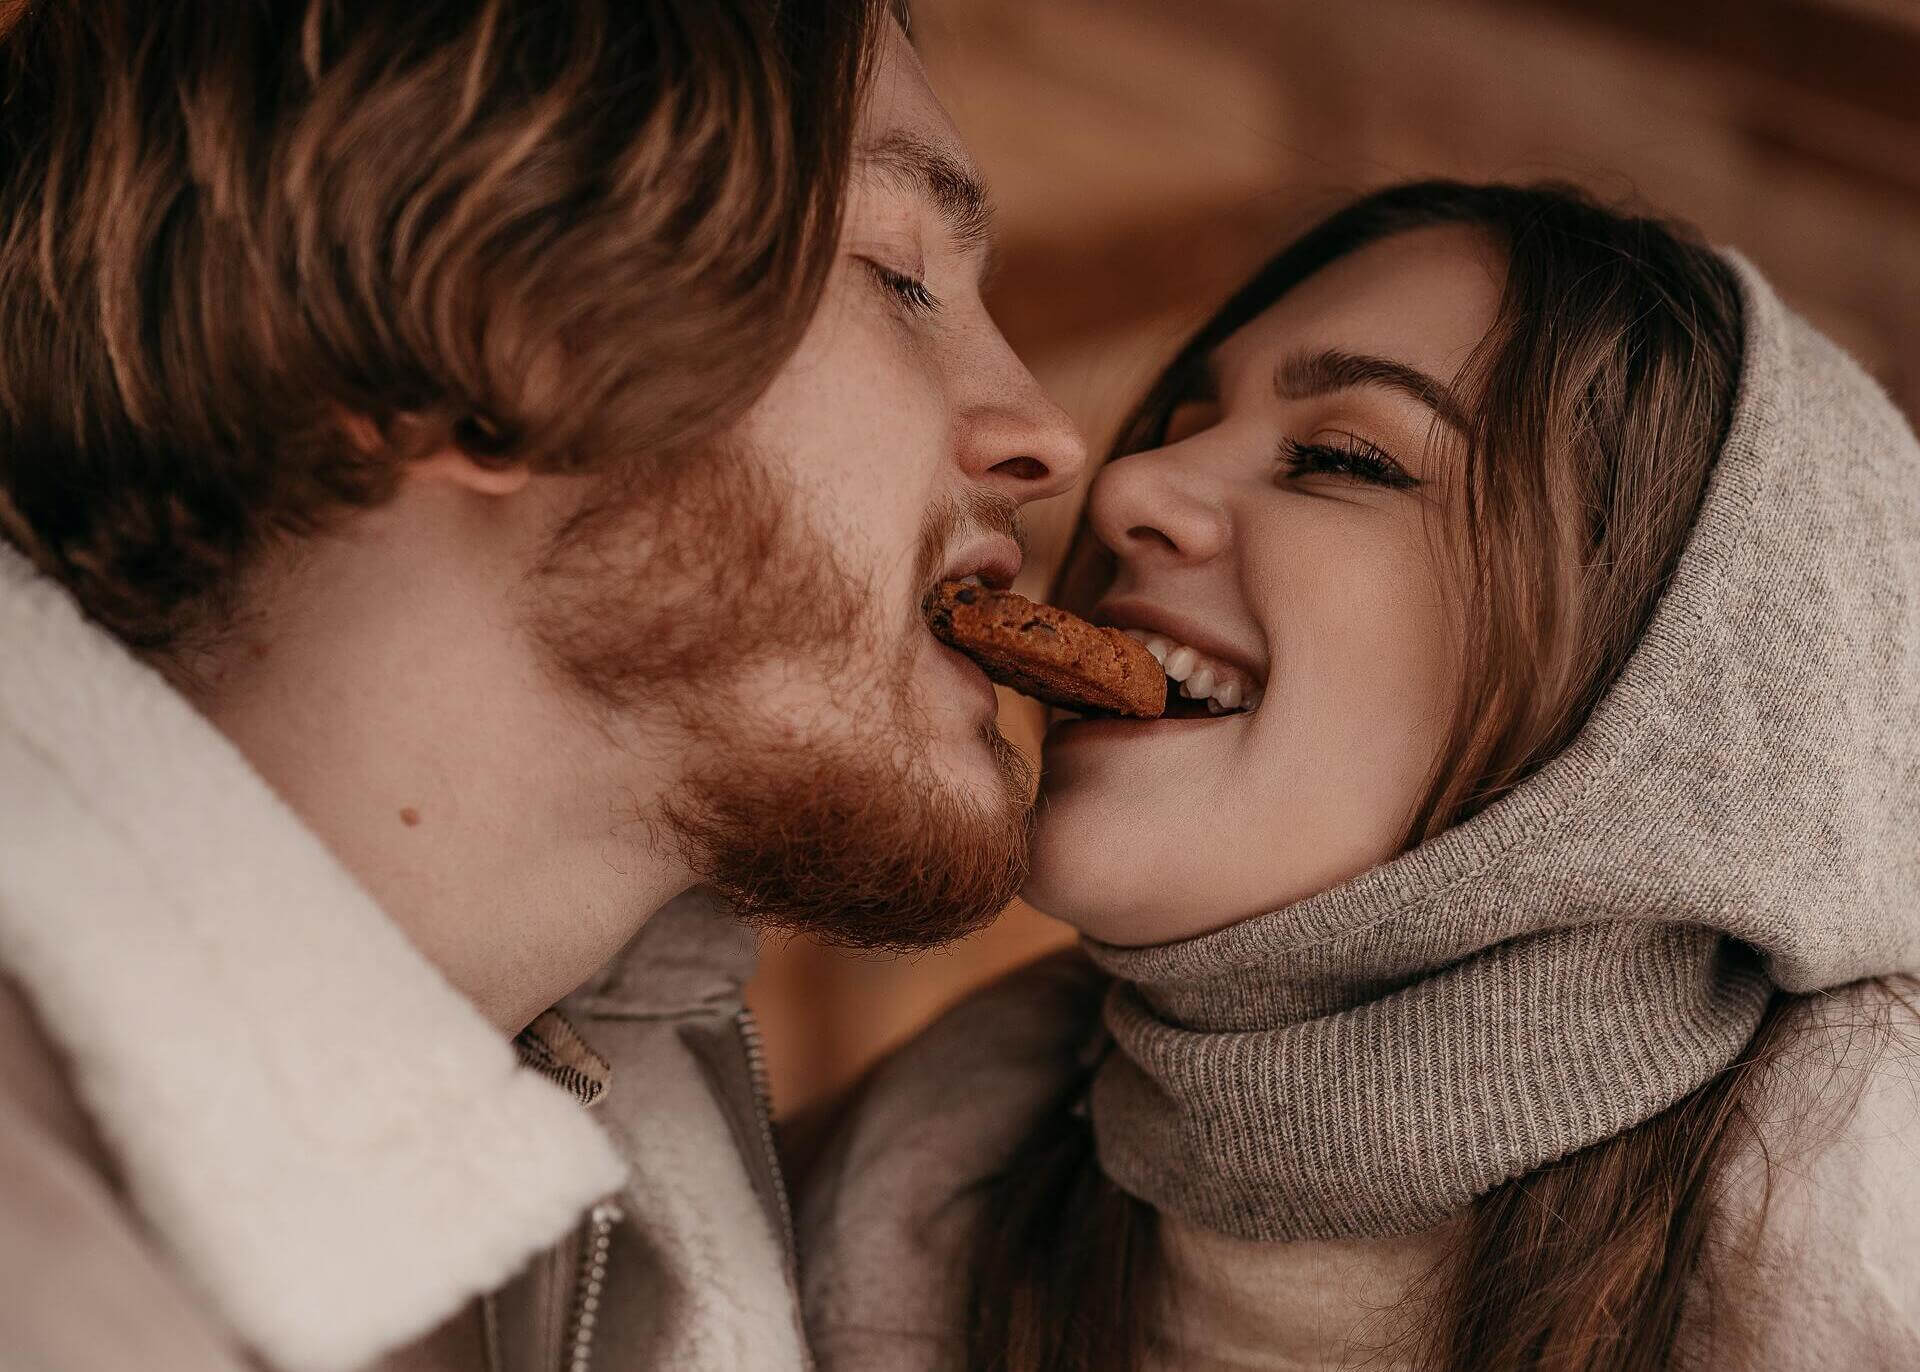 couple biting a cookie together